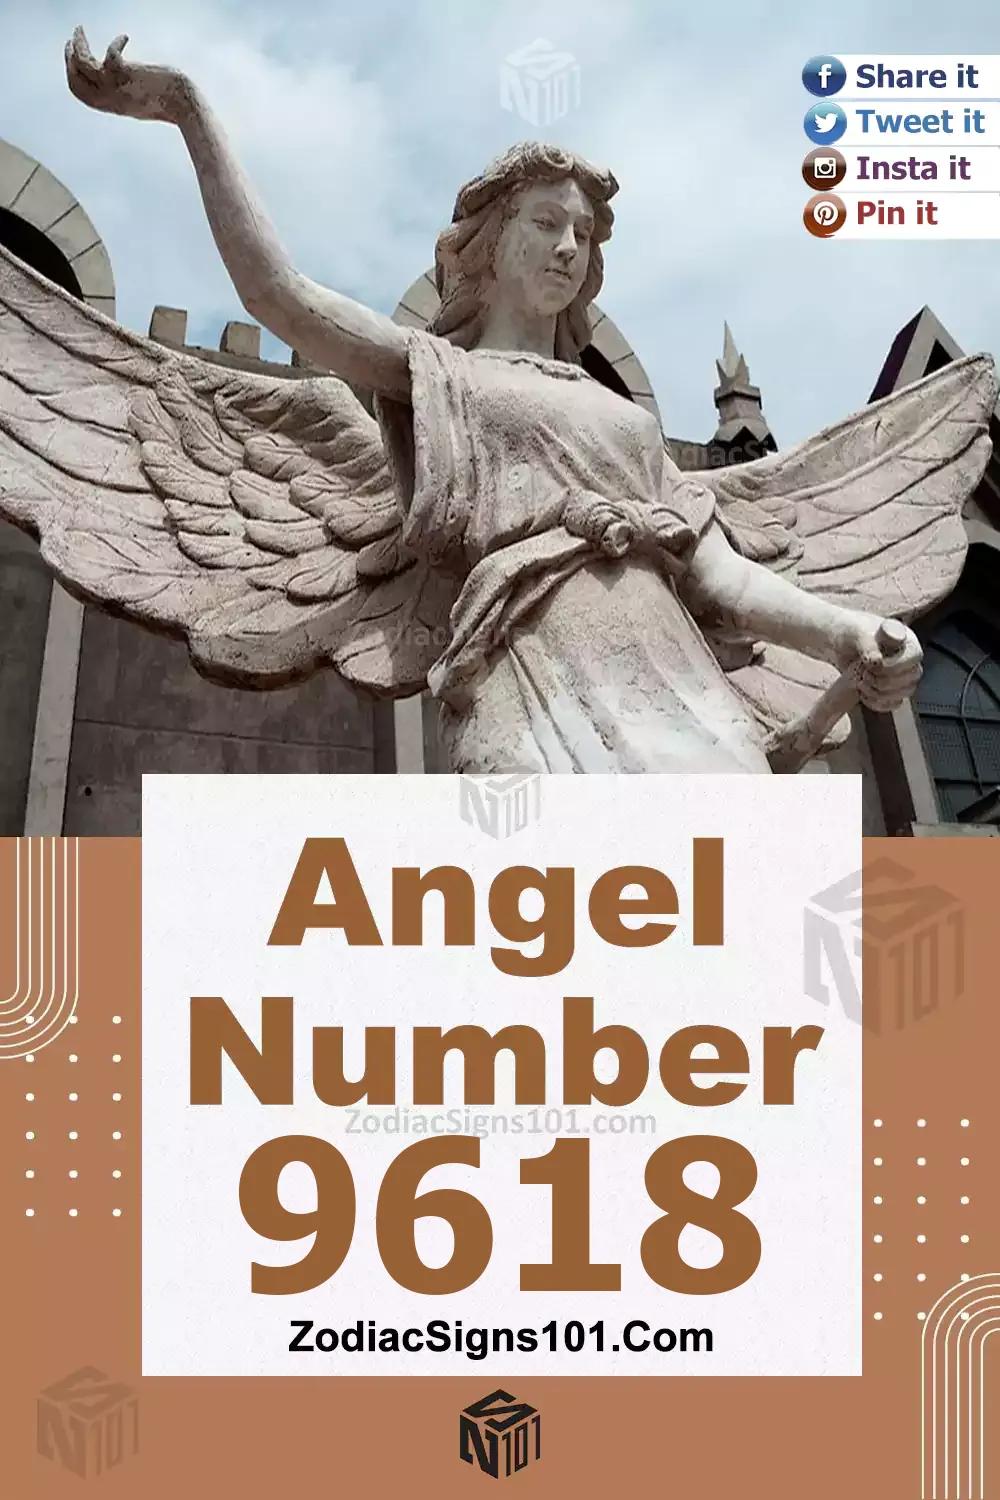 9618 Angel Number Meaning